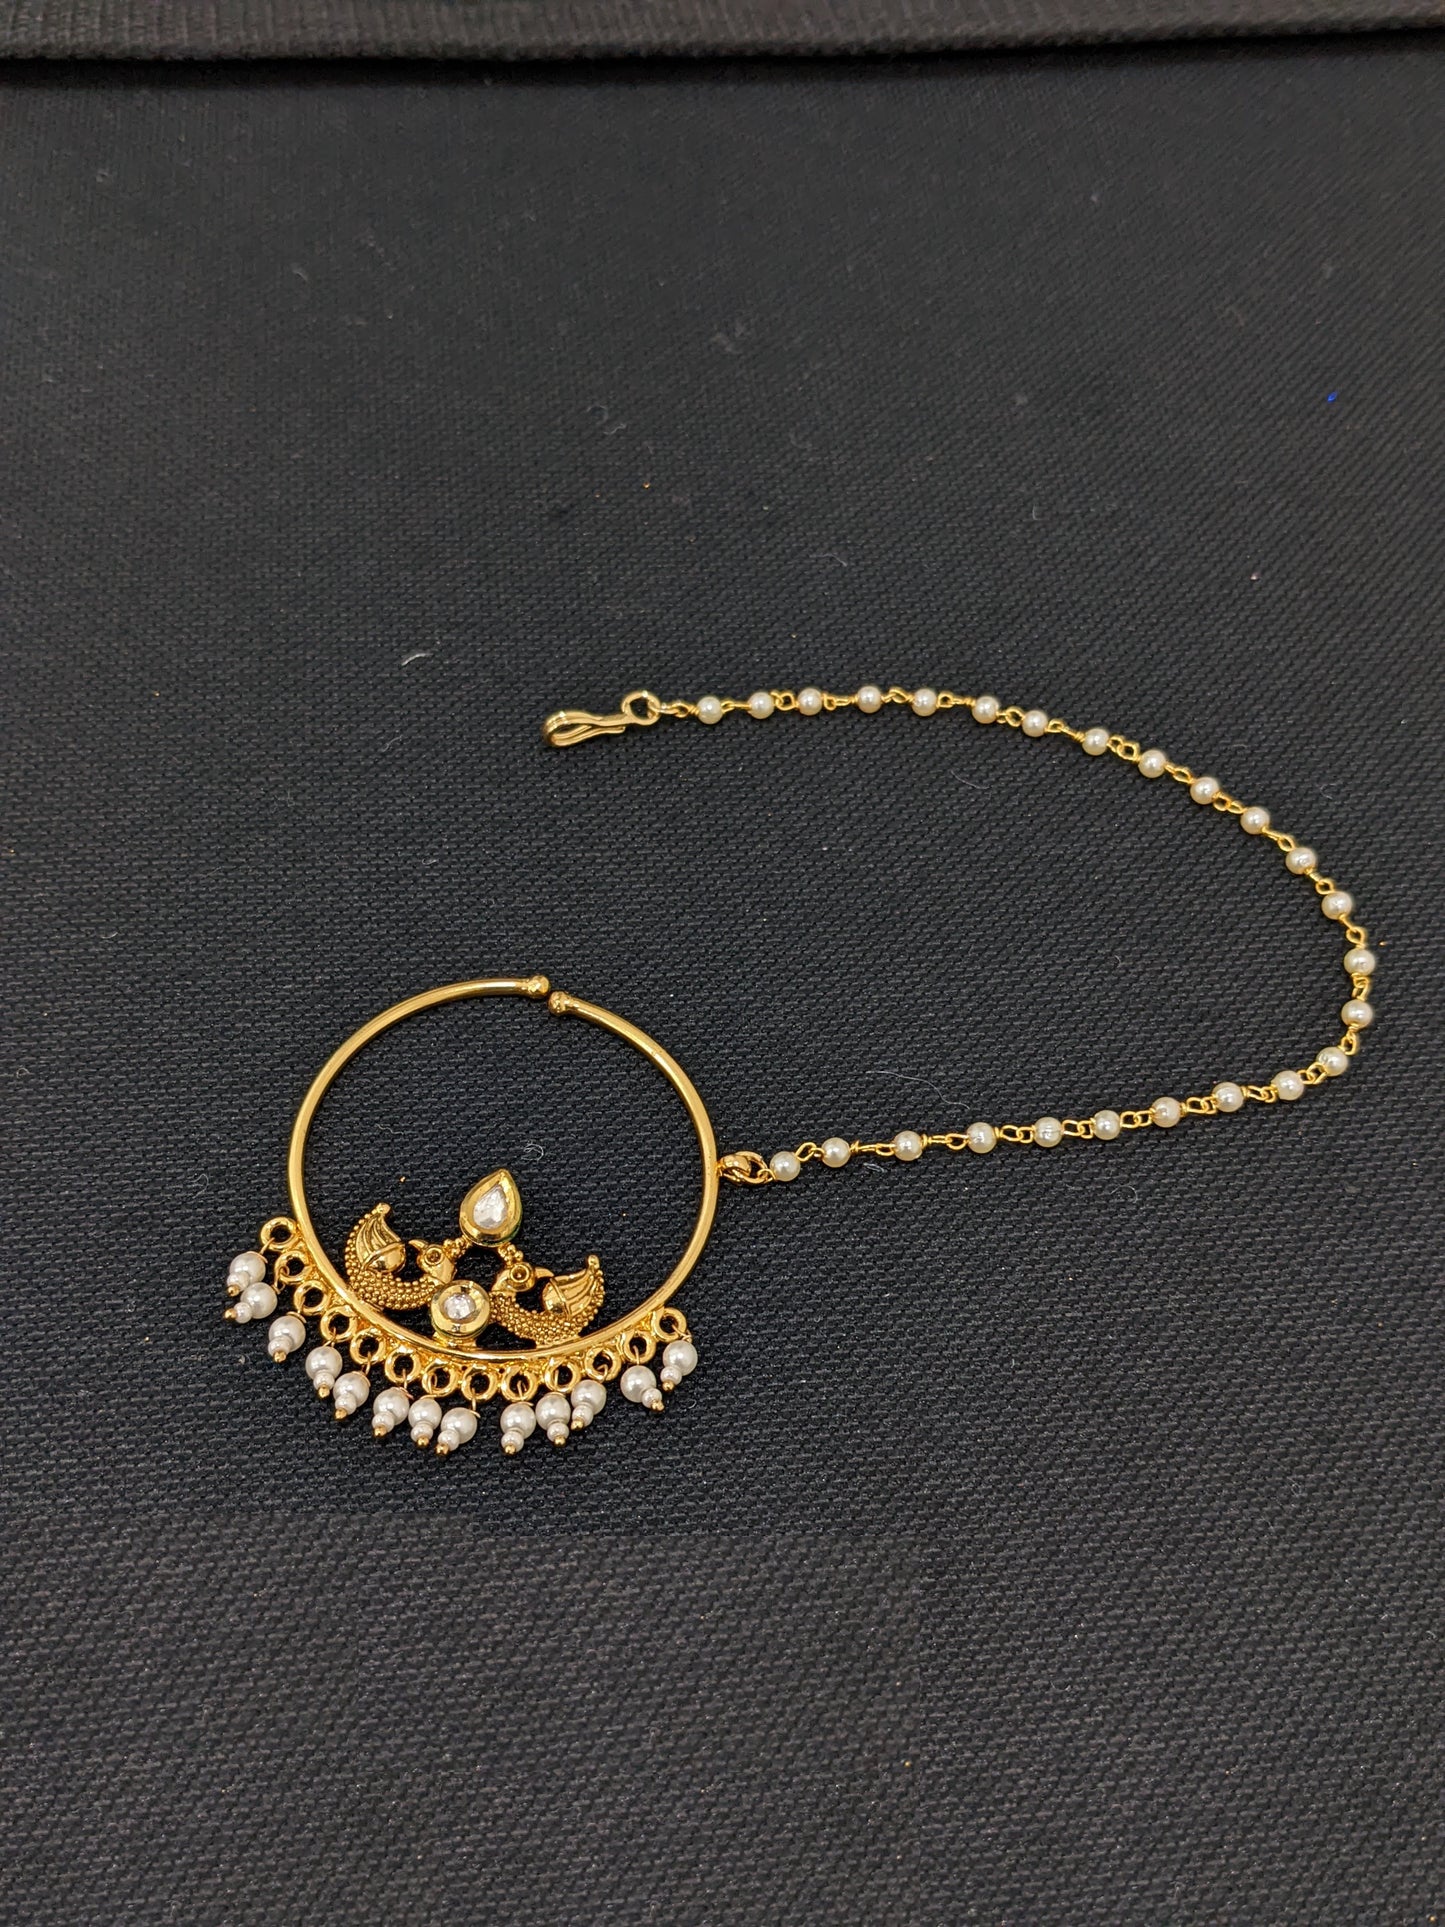 XL Size Kundan clip on nose ring with pearl bead chain